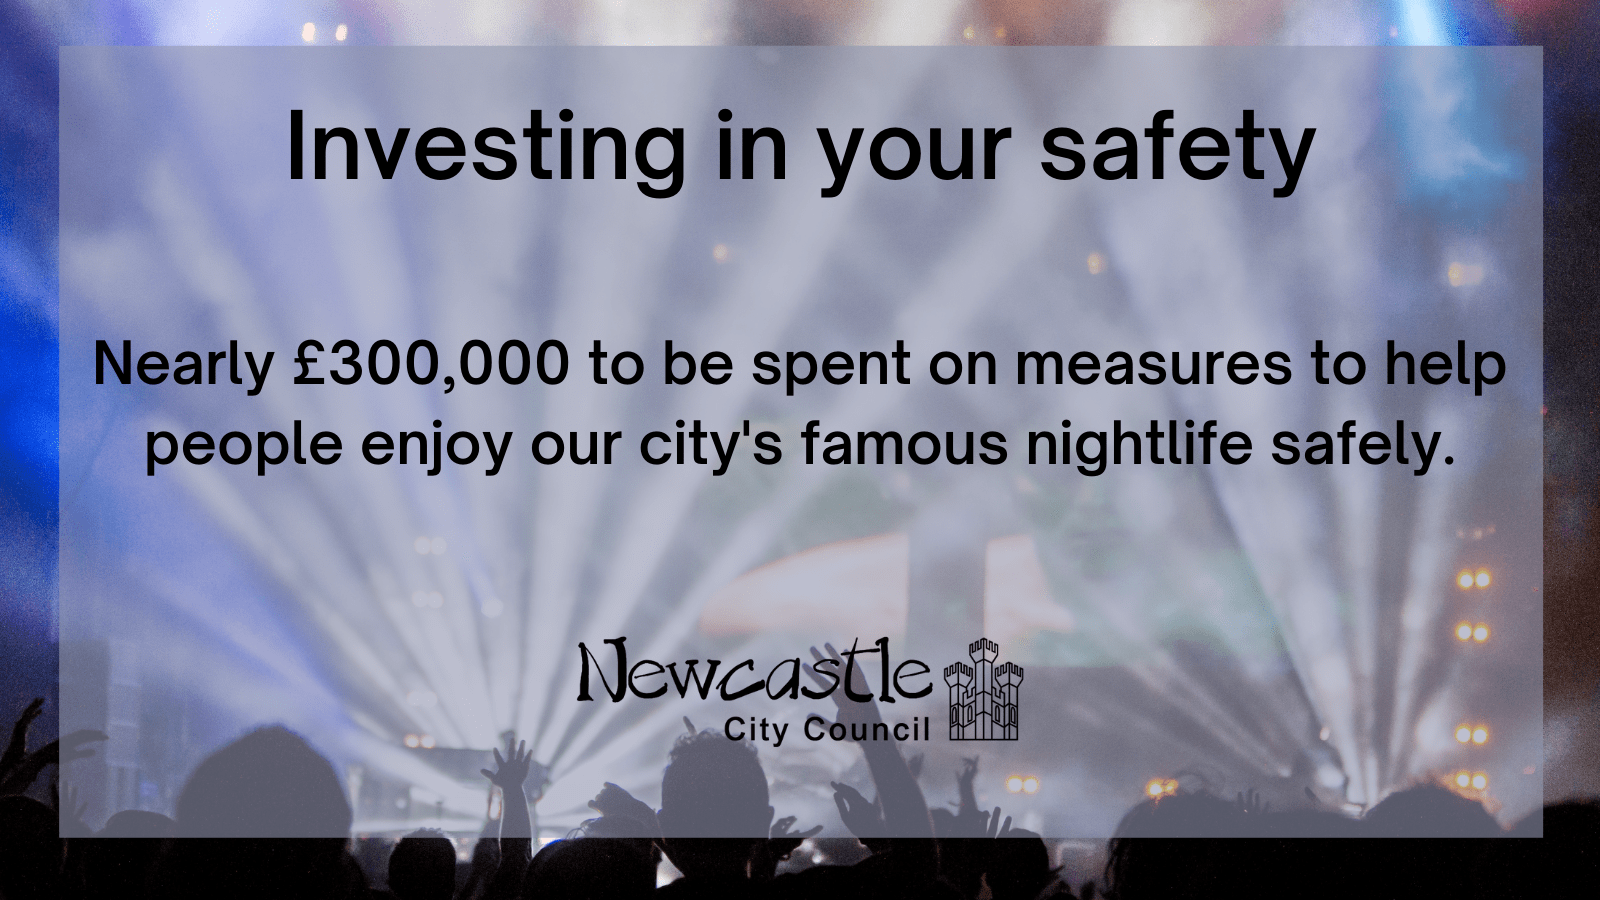 Nearly £300,000 to be spent on measures to help people enjoy our city's famous nightlife safely.